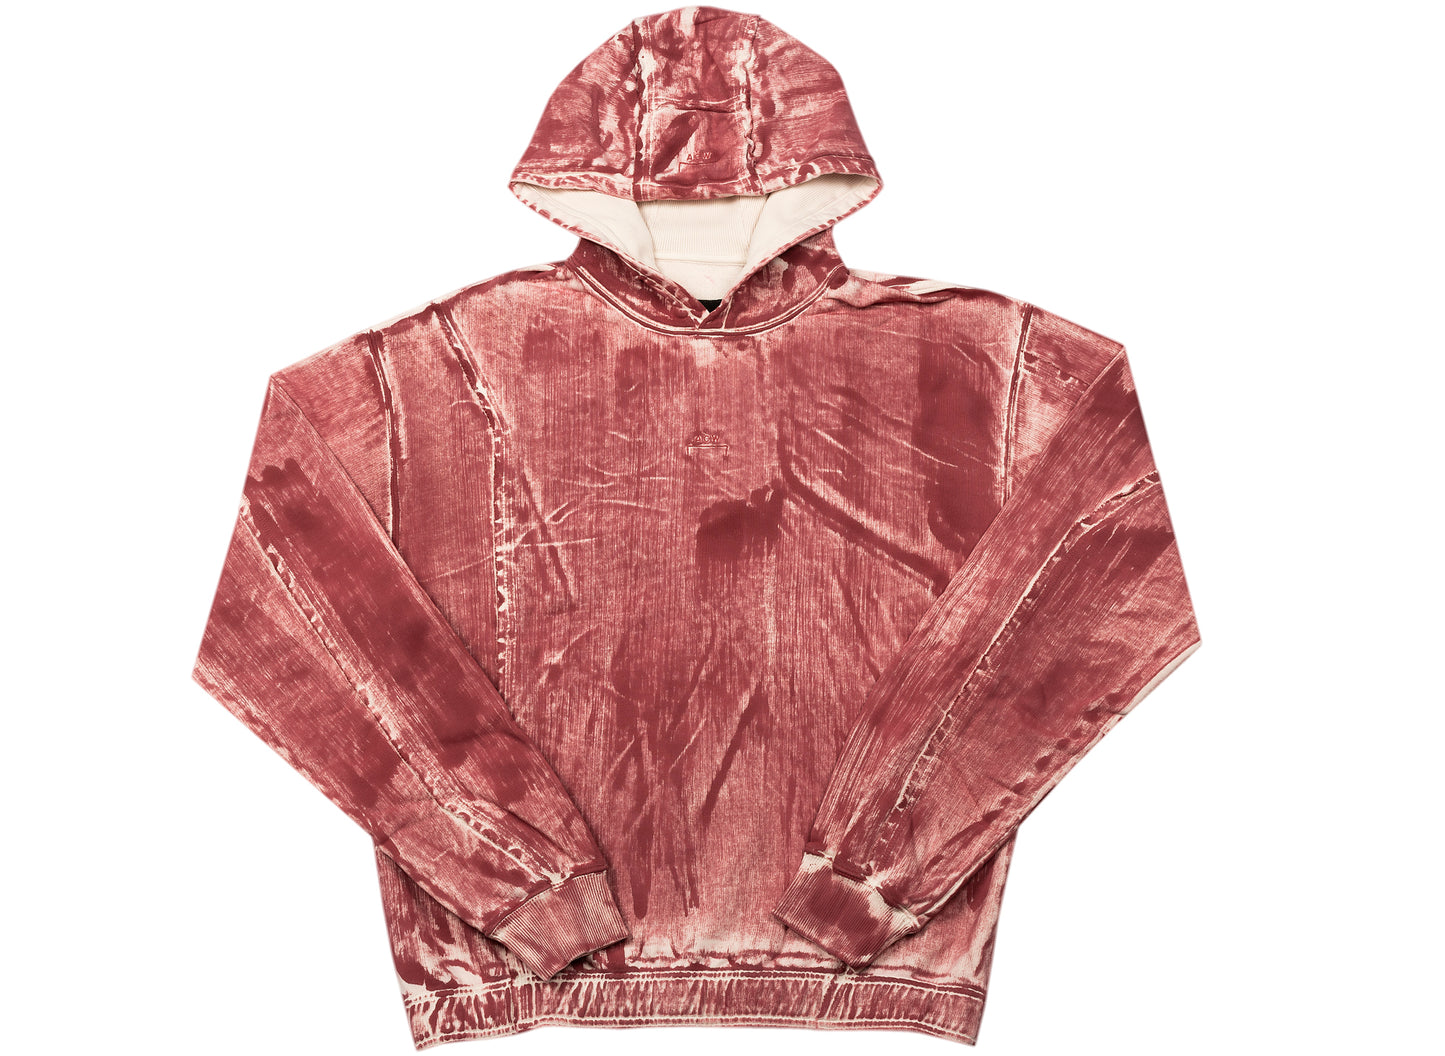 A-COLD-WALL* Corrosion Hooded Sweatshirt in Deep Red